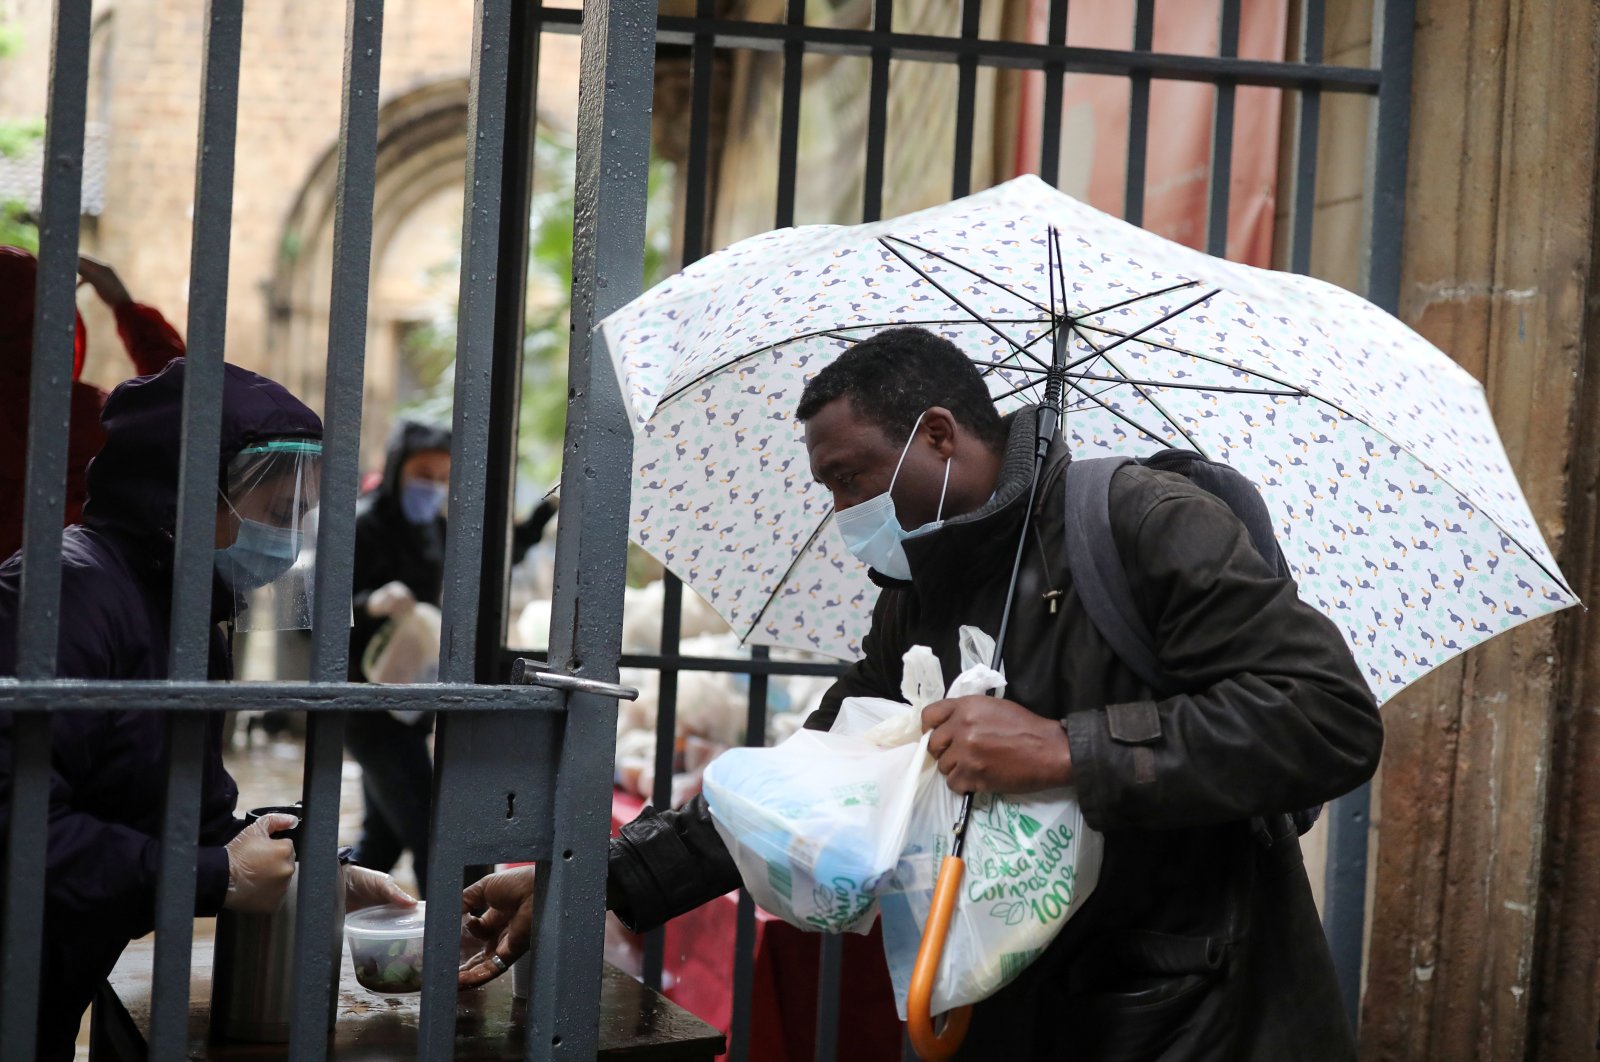 Volunteers give free food packages for a man amid economic hardship outside parish church of Santa Anna, amid the spread of the coronavirus disease (COVID-19), in Barcelona, Spain, April 21, 2020. (Reuters Photo)